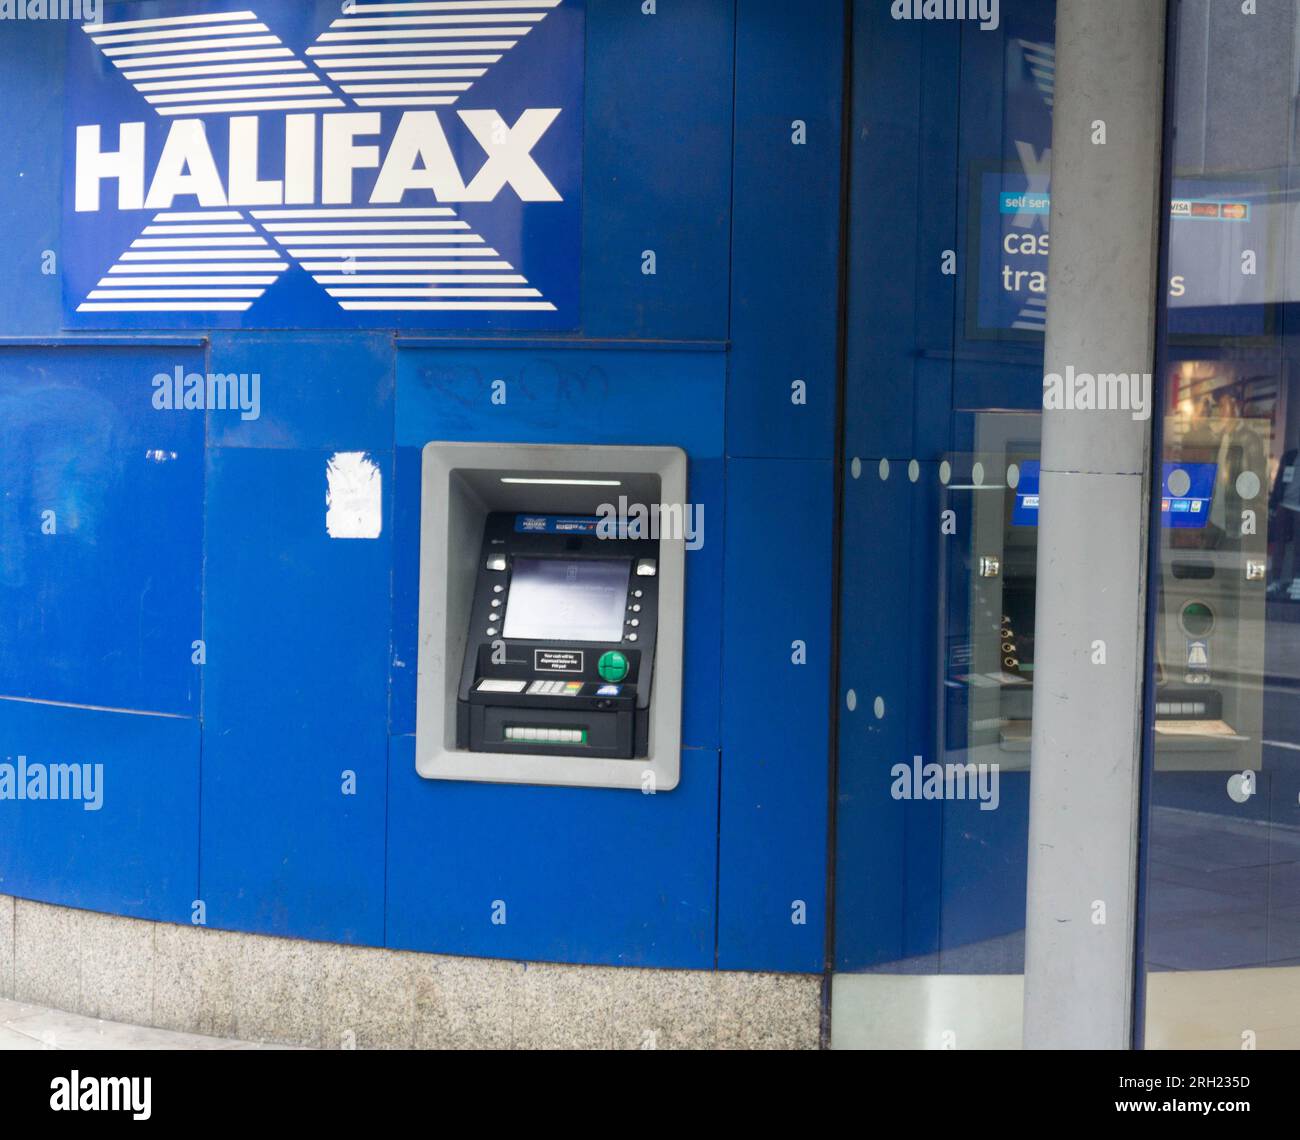 Cash dispenser at the Halifax branch in Hammersmith, London, UK Stock Photo